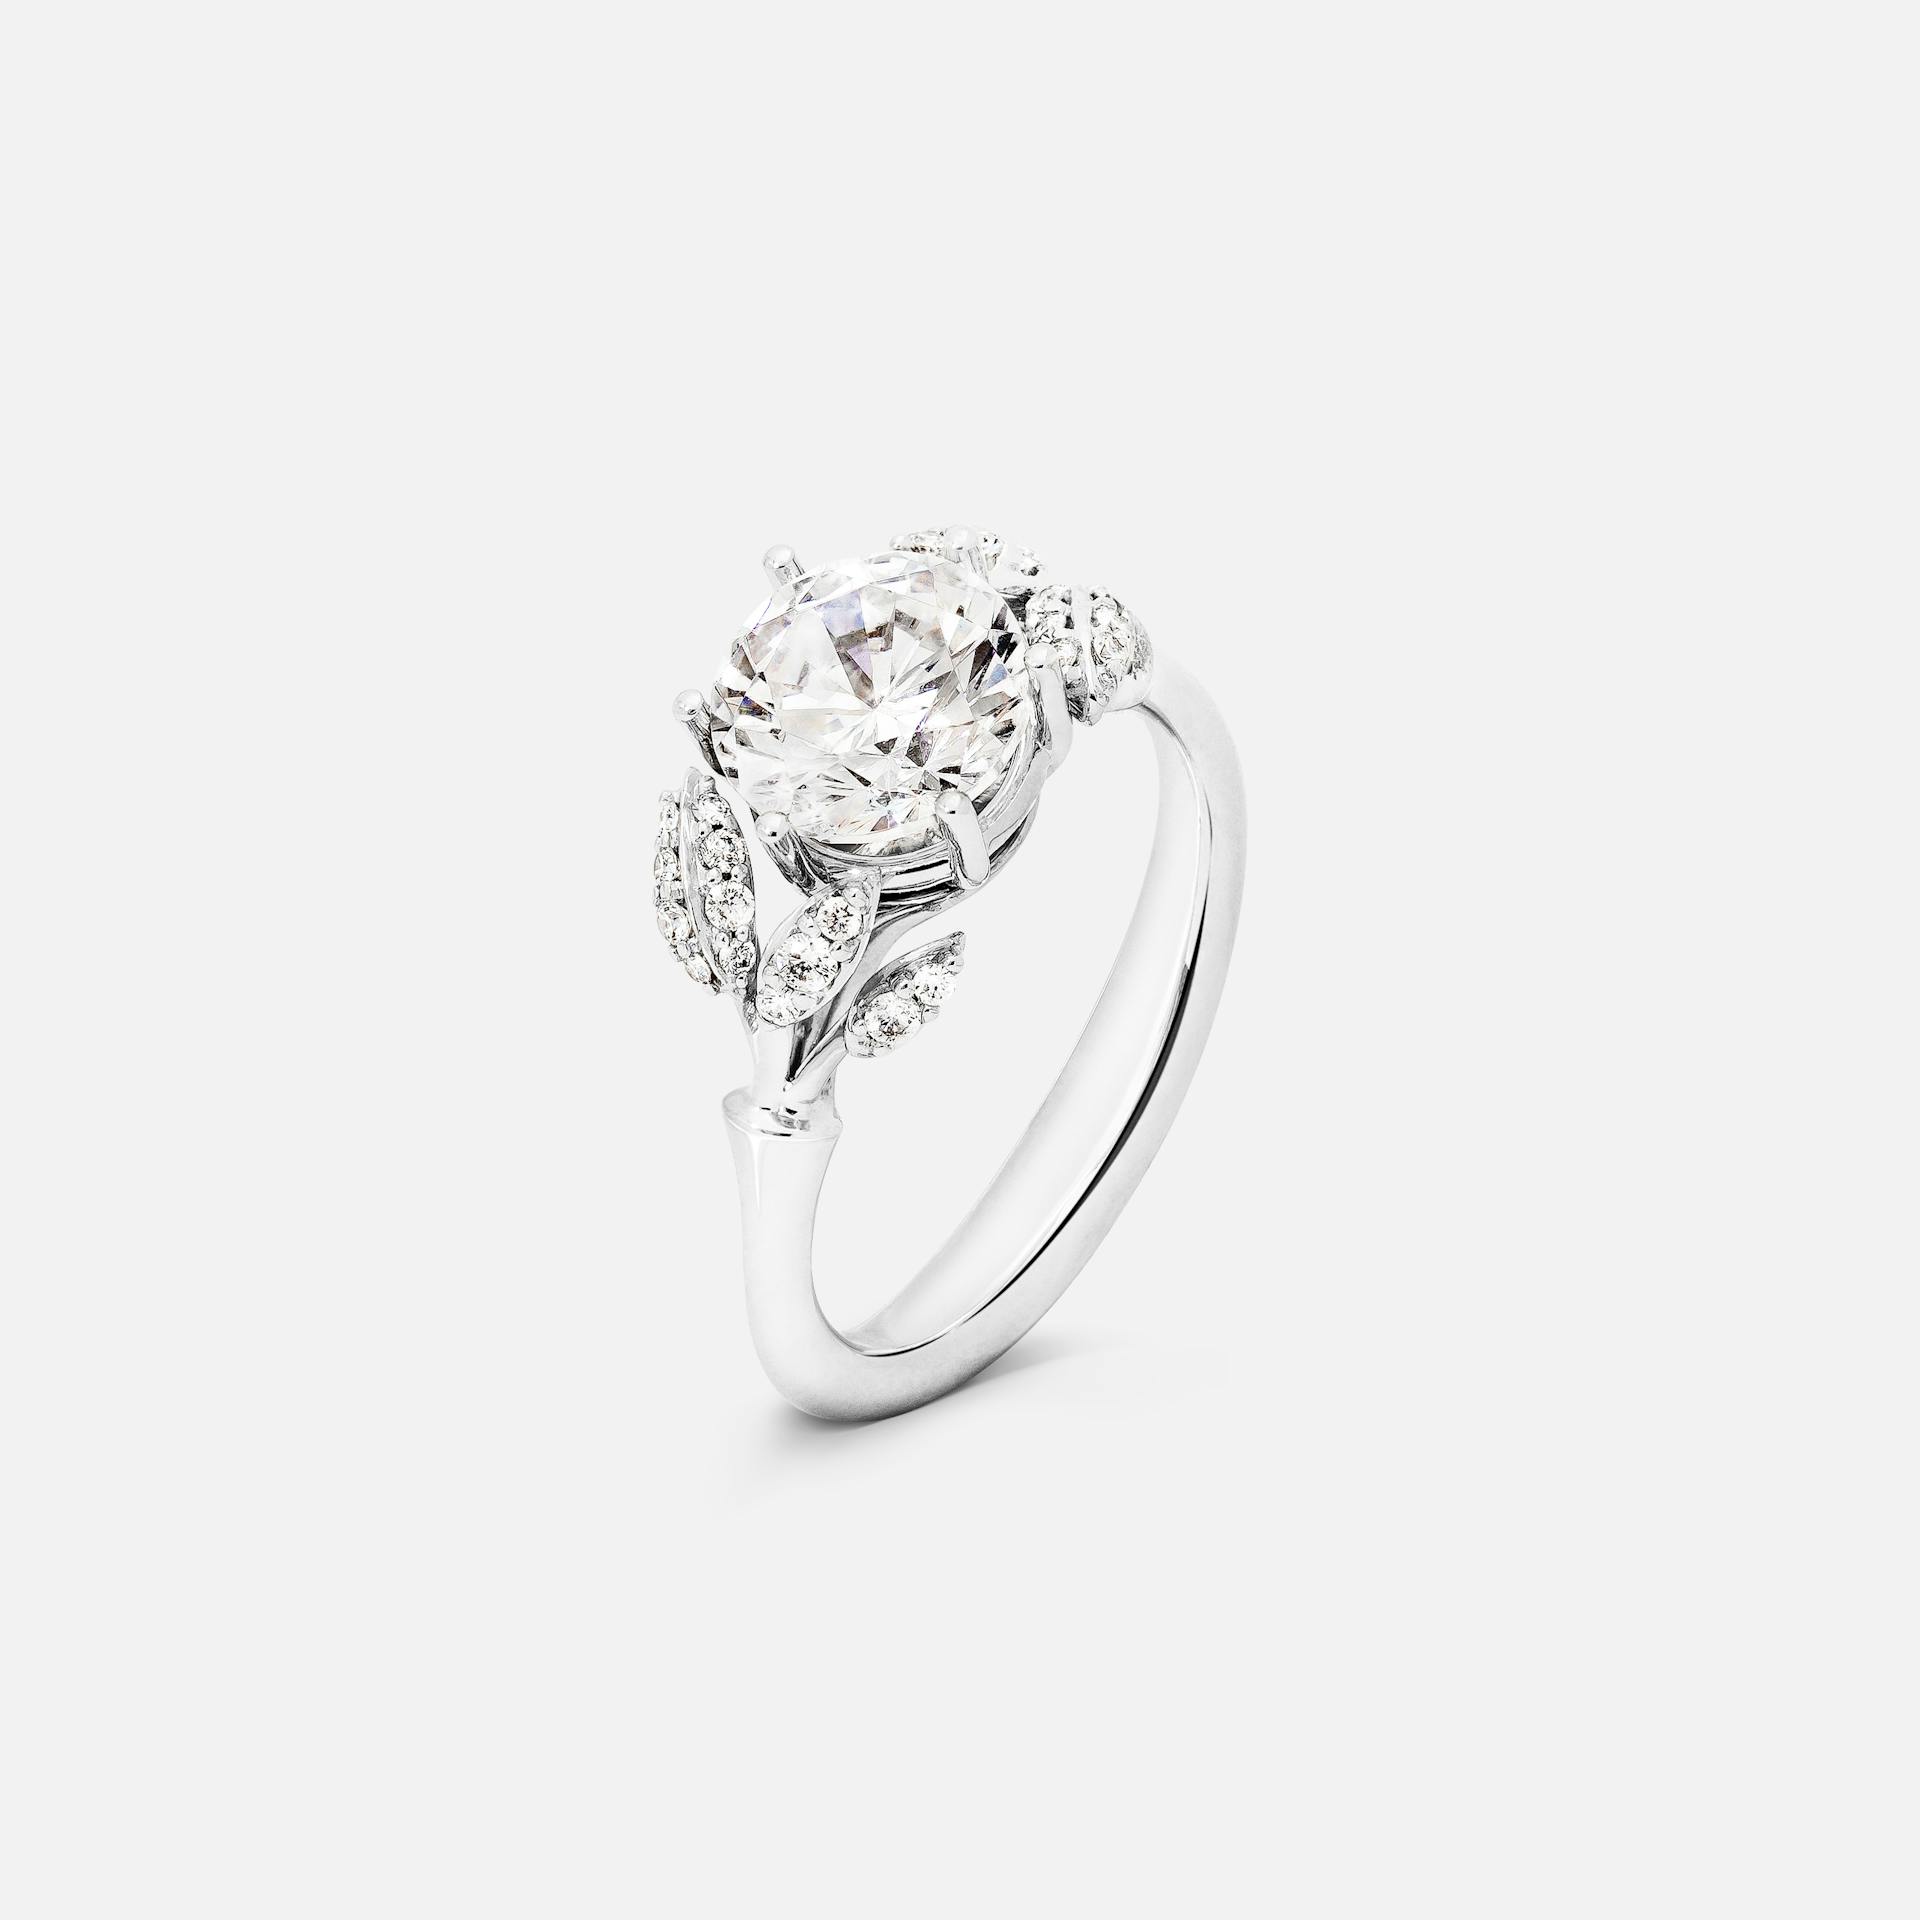 Winter Frost solitaire ring Dummy item for web - ring solitaire WinterFrost WG 18k white gold set with a brilliant-cut diamond from 0.80 ct. TW. VS.